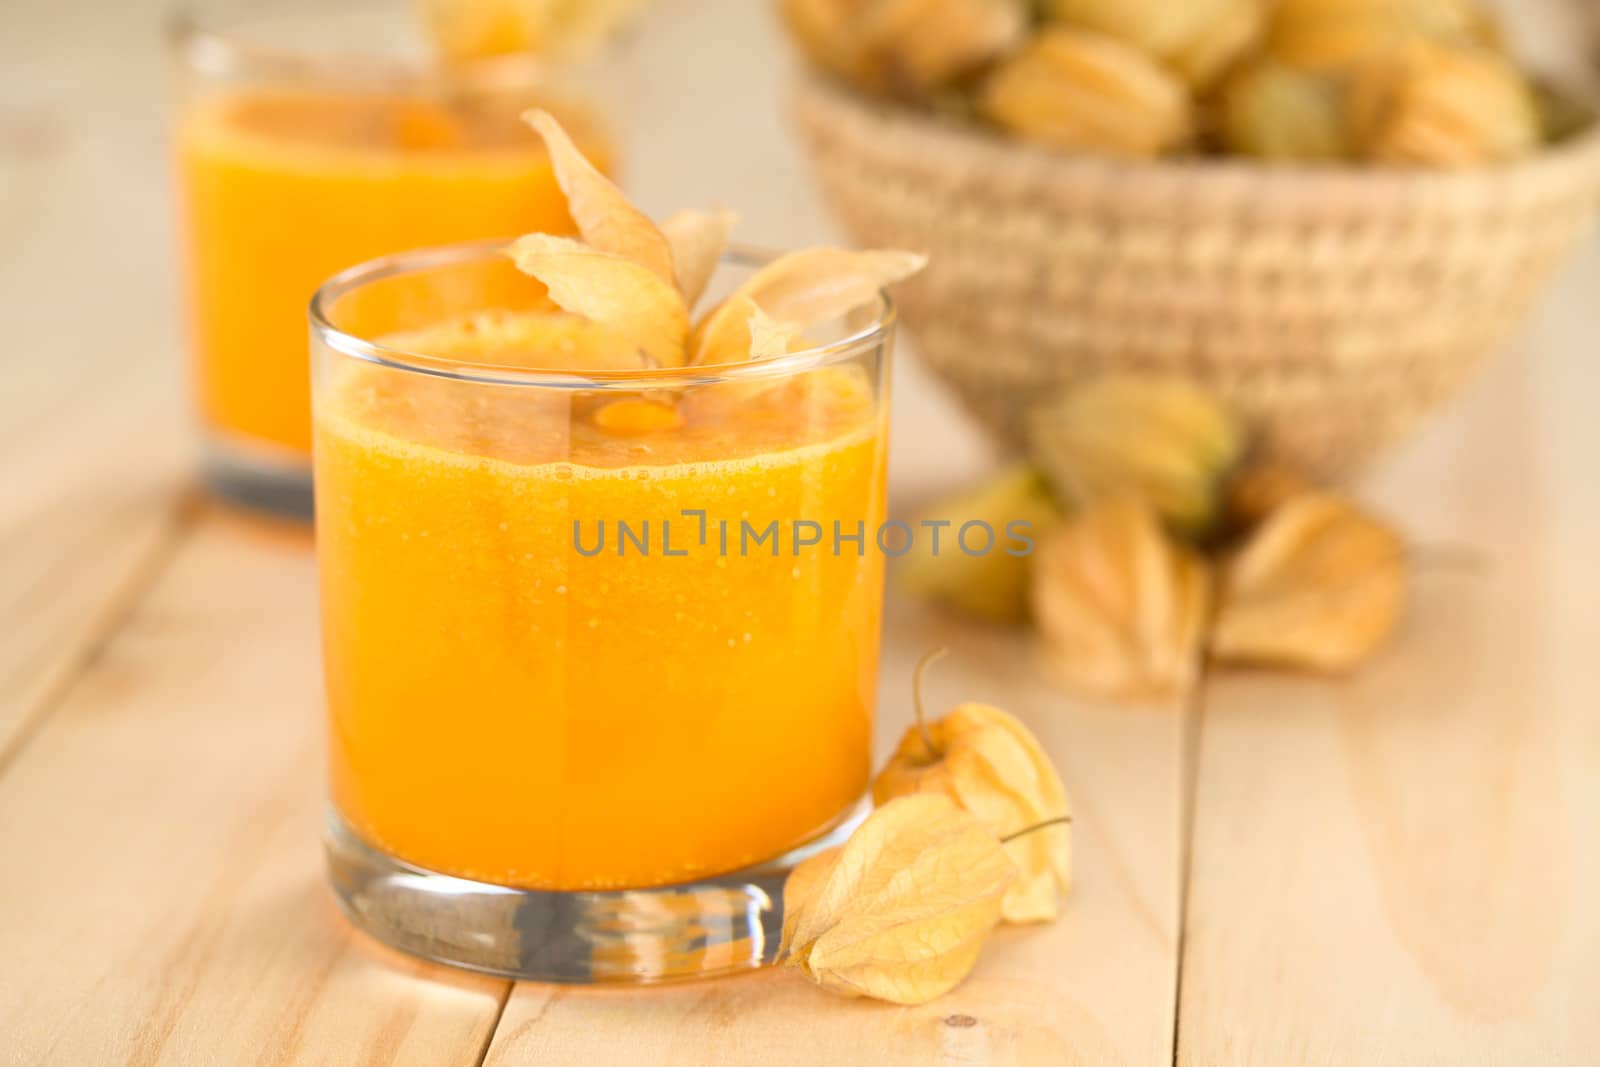 Freshly prepared juice made of physalis (lat. Physalis peruviana) served in glass with physalis fruits on the side and a basket full of physalis in the back (Selective Focus, Focus on the front of the glass rim)
